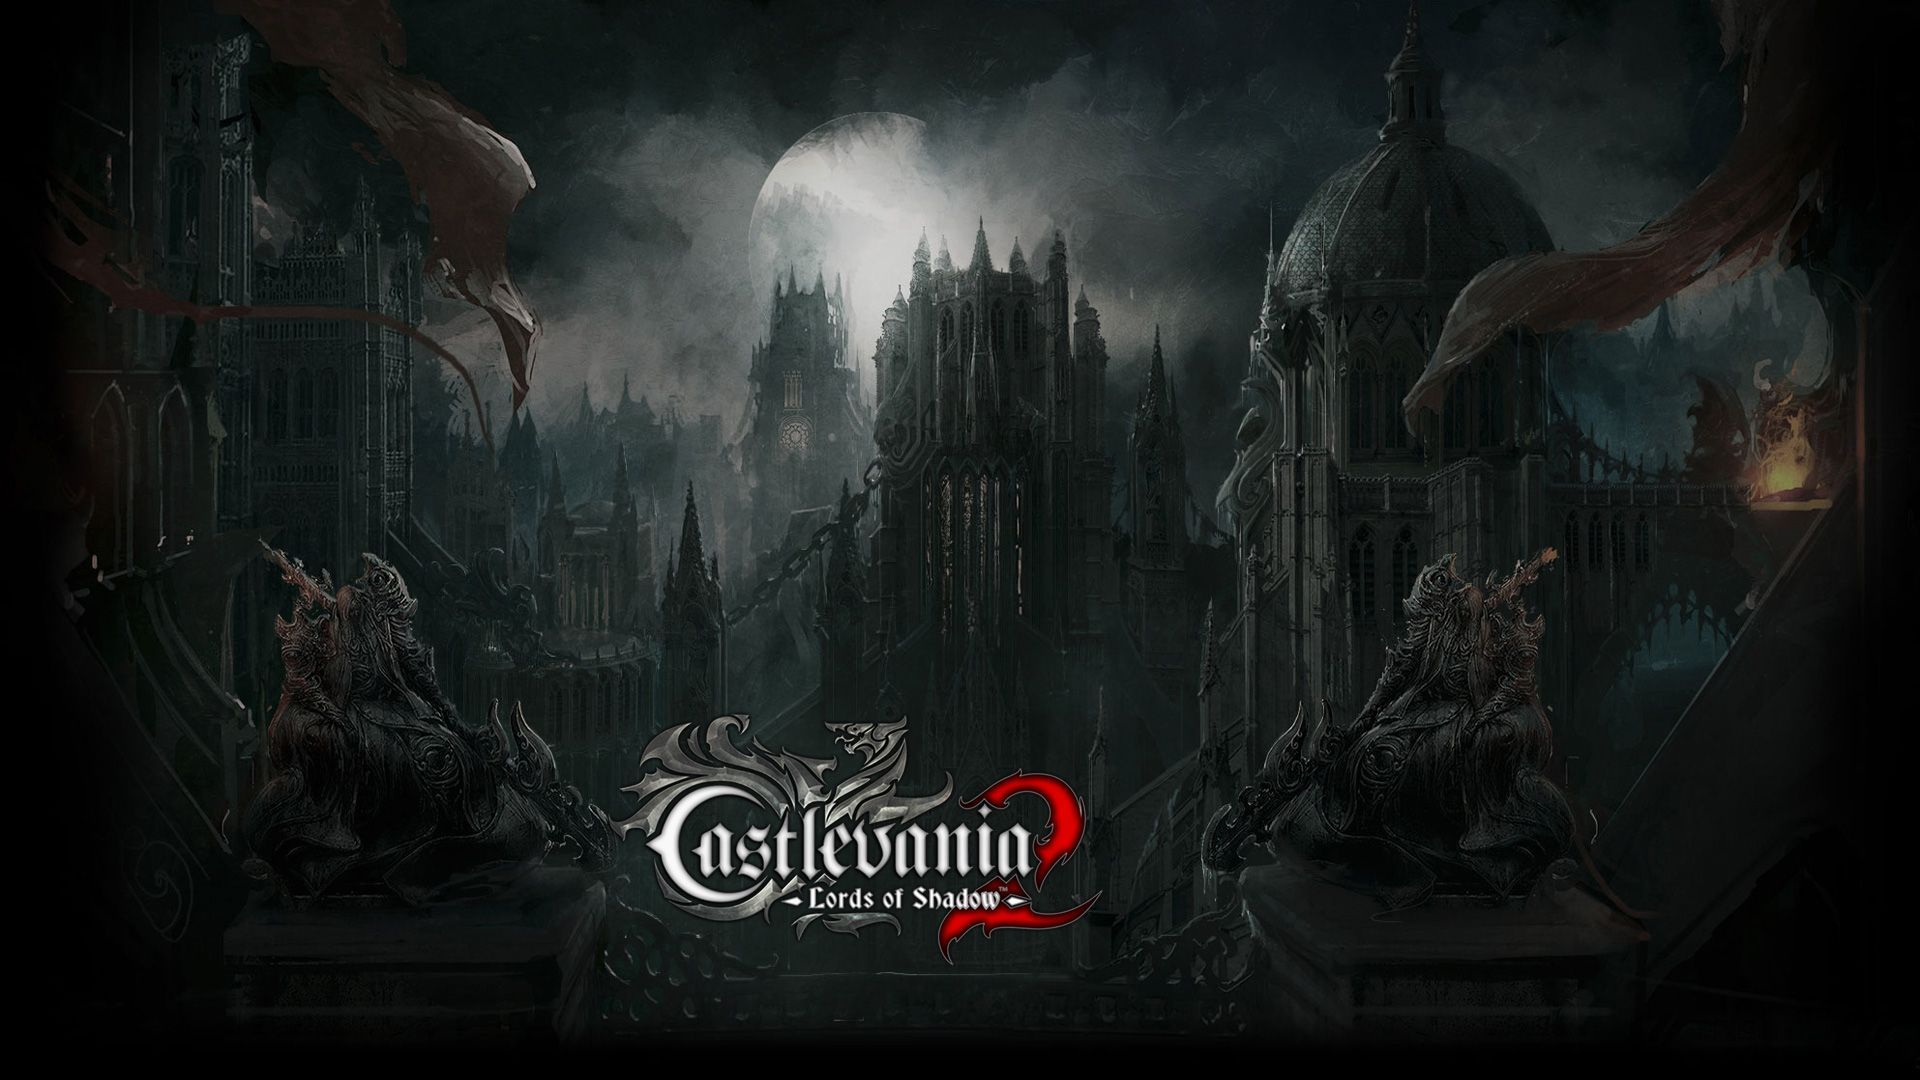 Gallery for - wallpapers castlevania hd